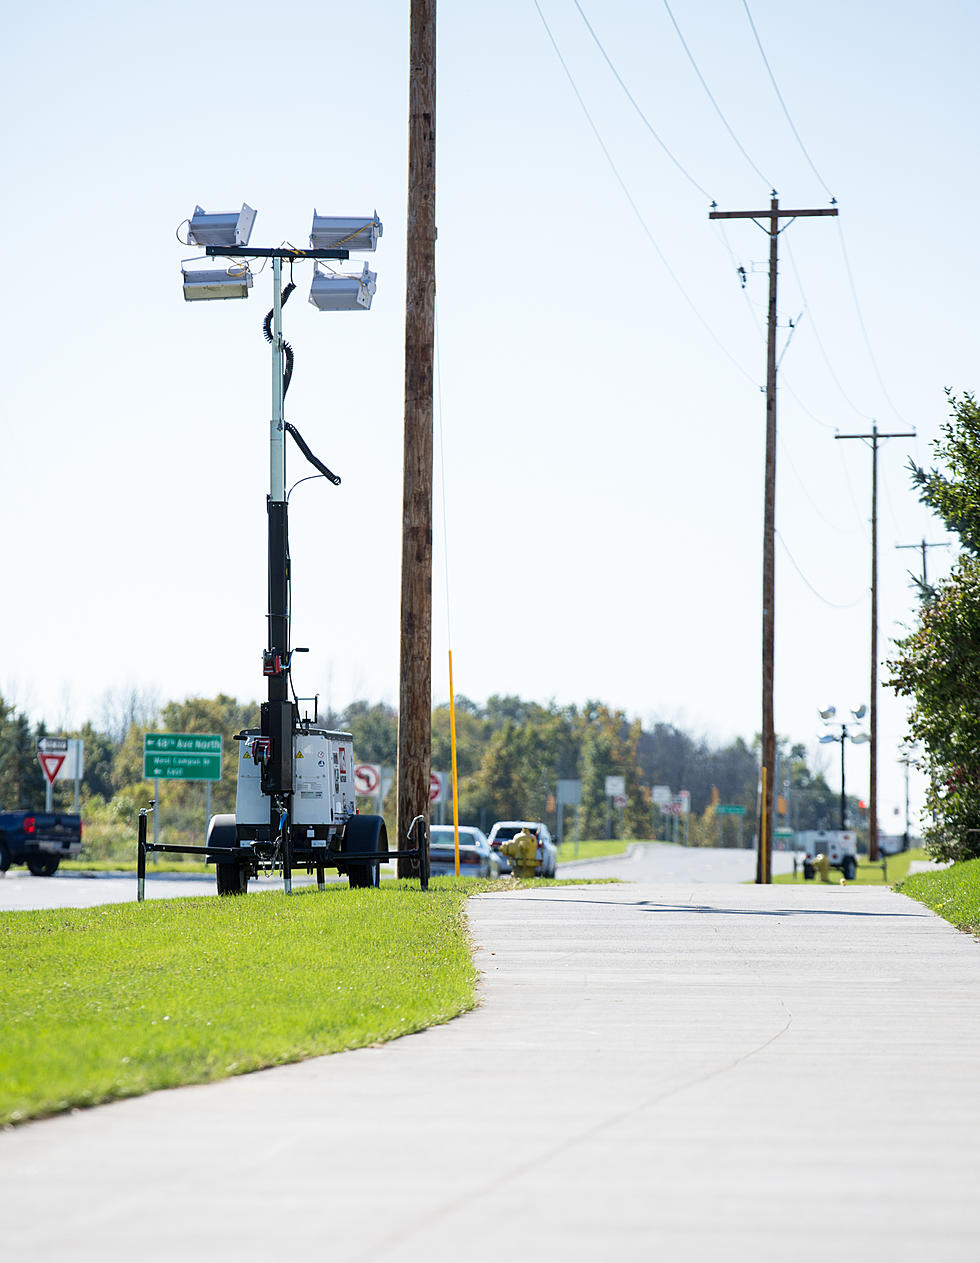 New Street Lights Increase Safety at GVSU, More Lights Planned